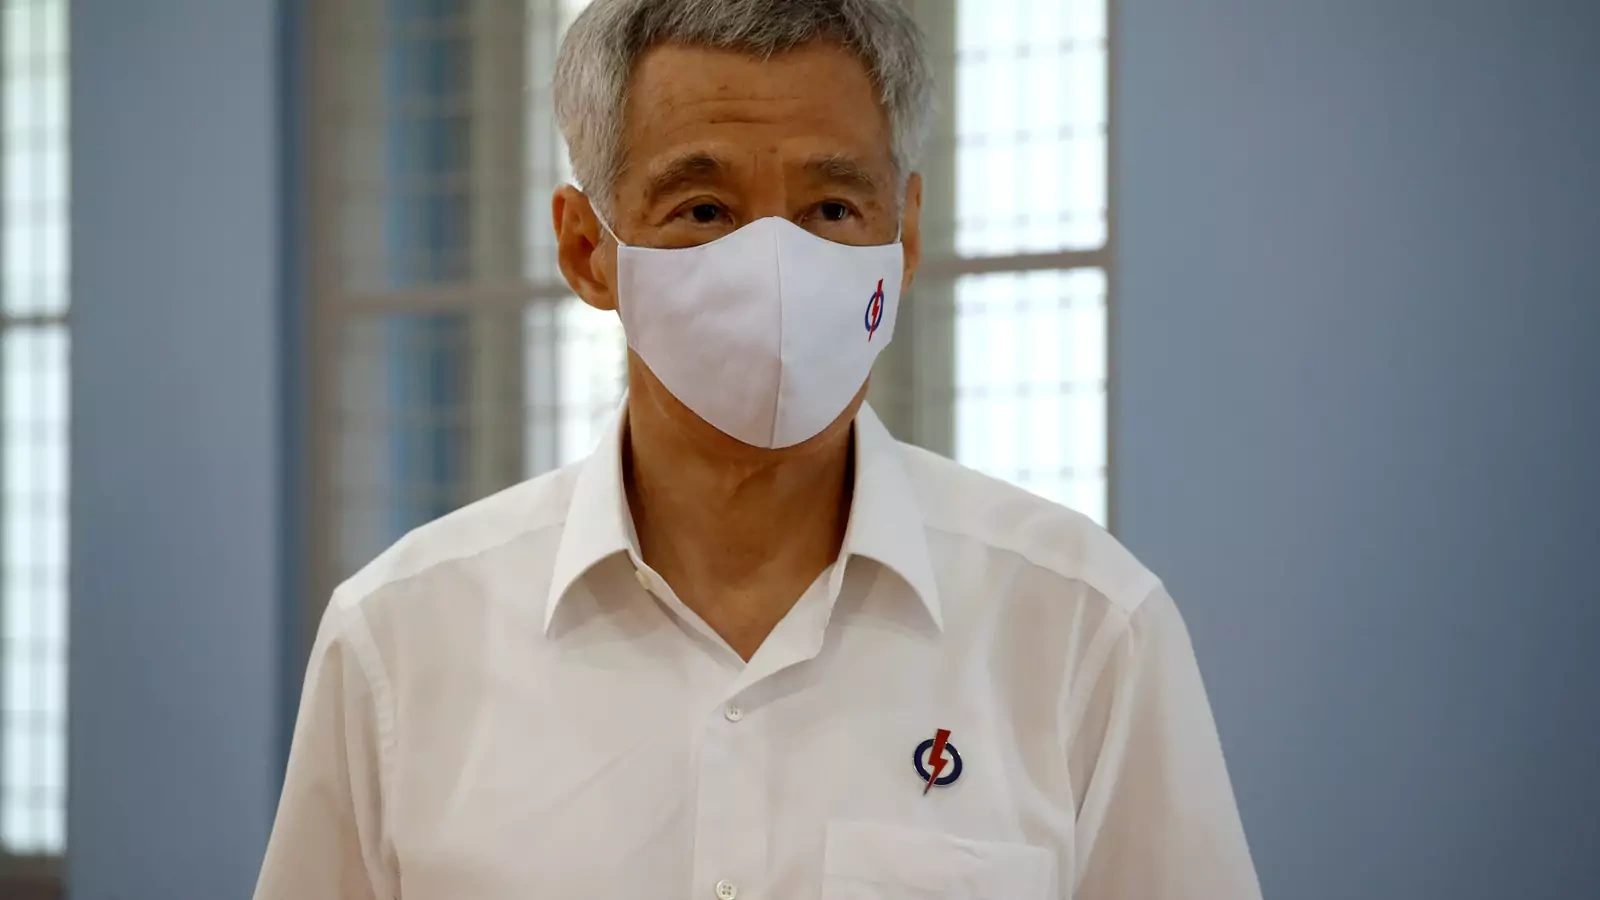 Singapore's Prime Minister Lee Hsien Loong of the ruling People's Action Party, wearing a face mask, prepares to give a speech at a nomination center ahead of the general election in Singapore on June 30, 2020.